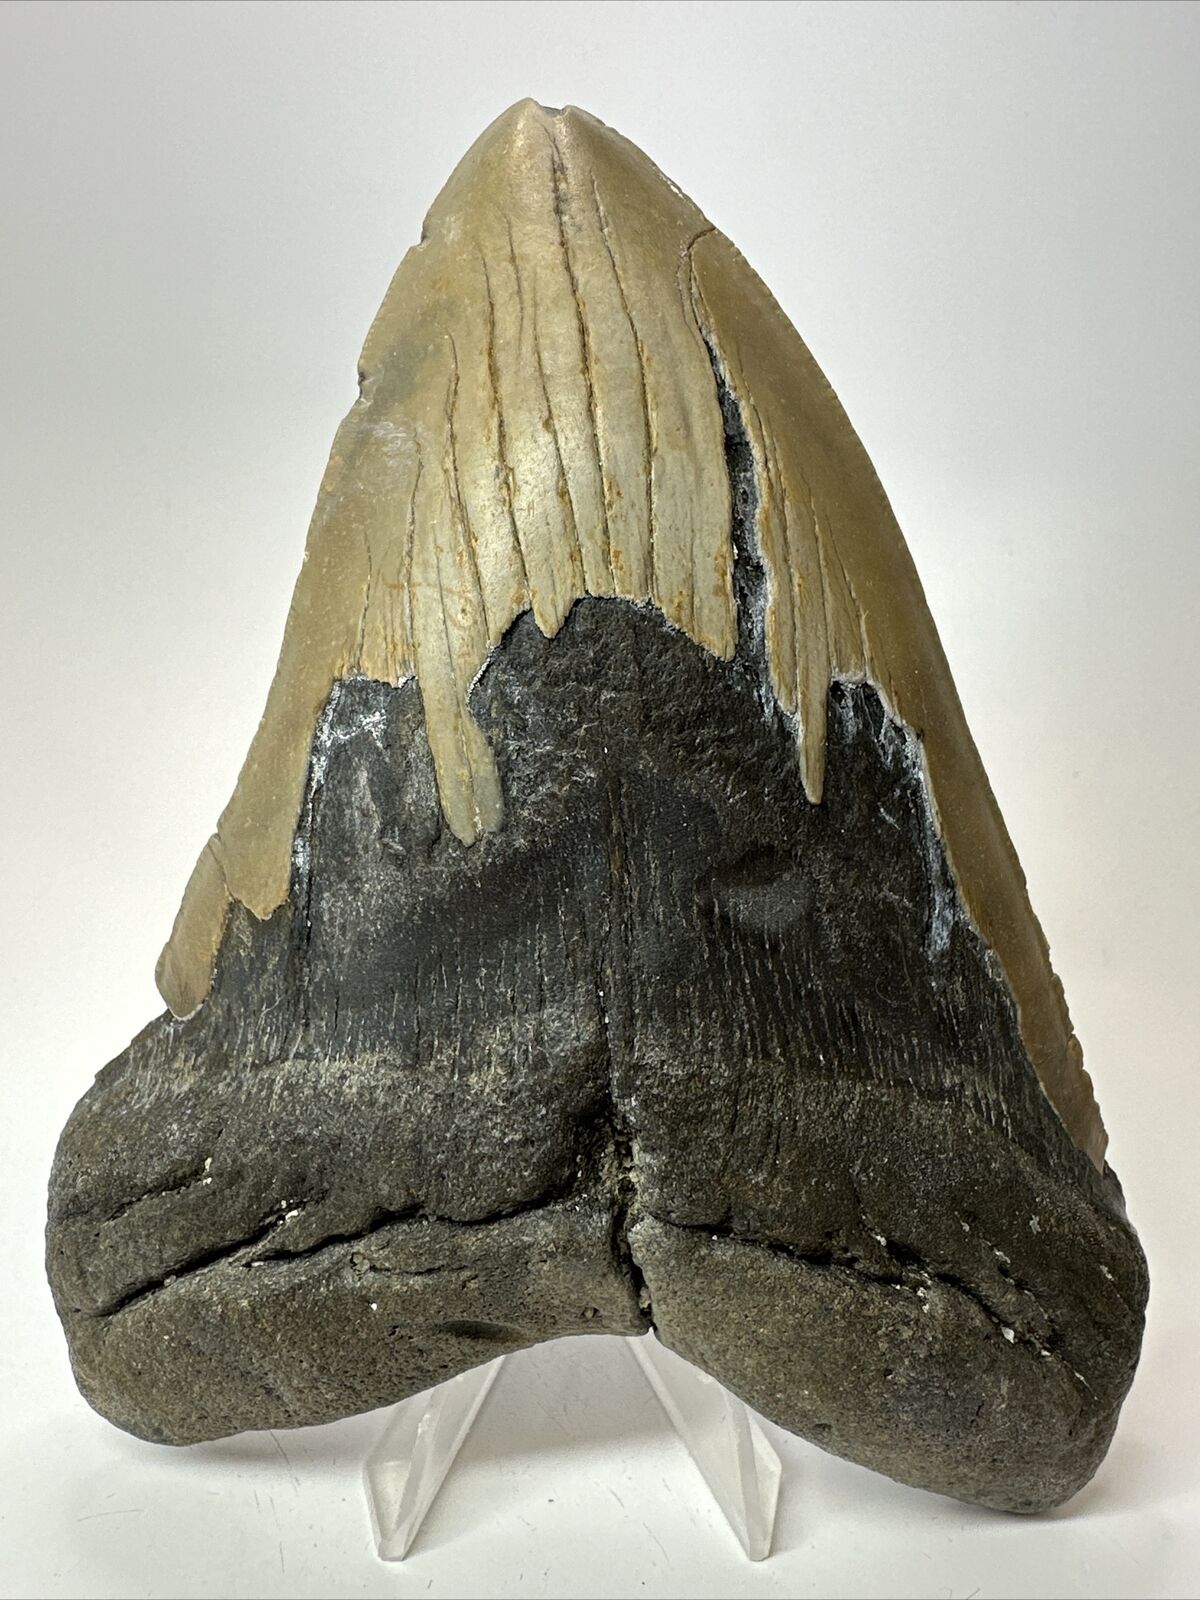 Megalodon Shark Tooth 6.02” Authentic - Huge Fossil - Carolina 17581